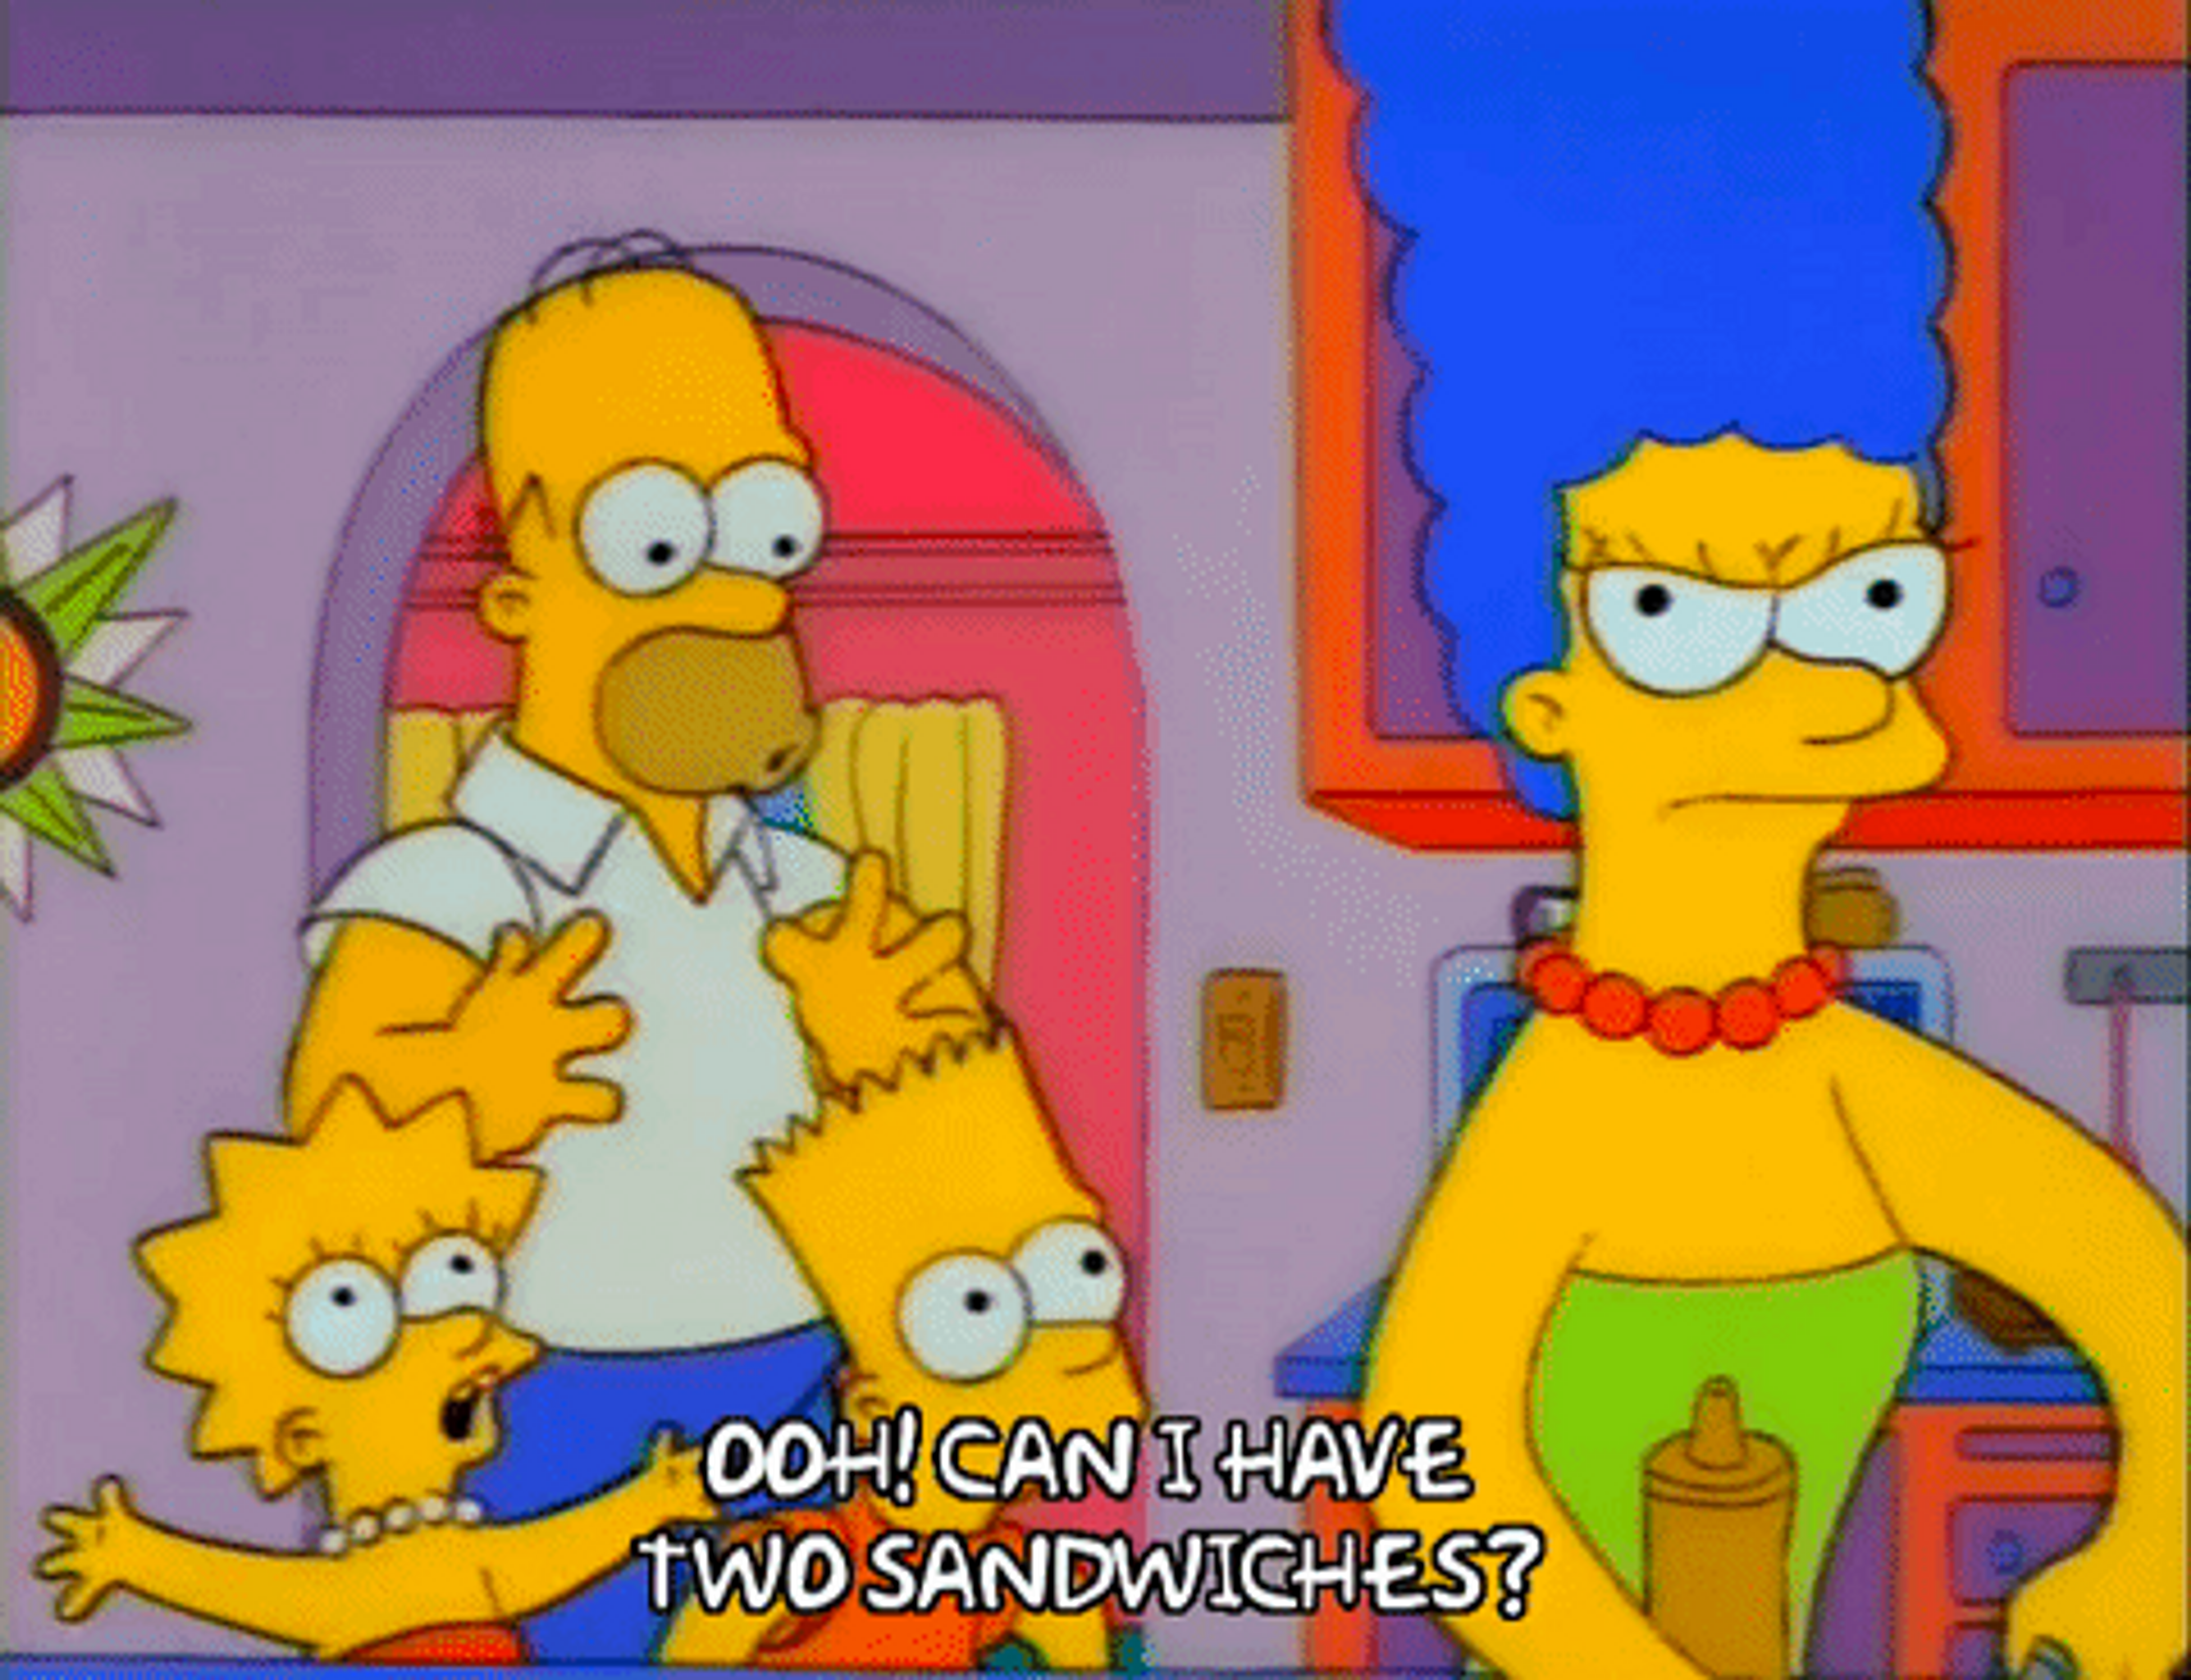 Marge Simpson making sandwiches for the family